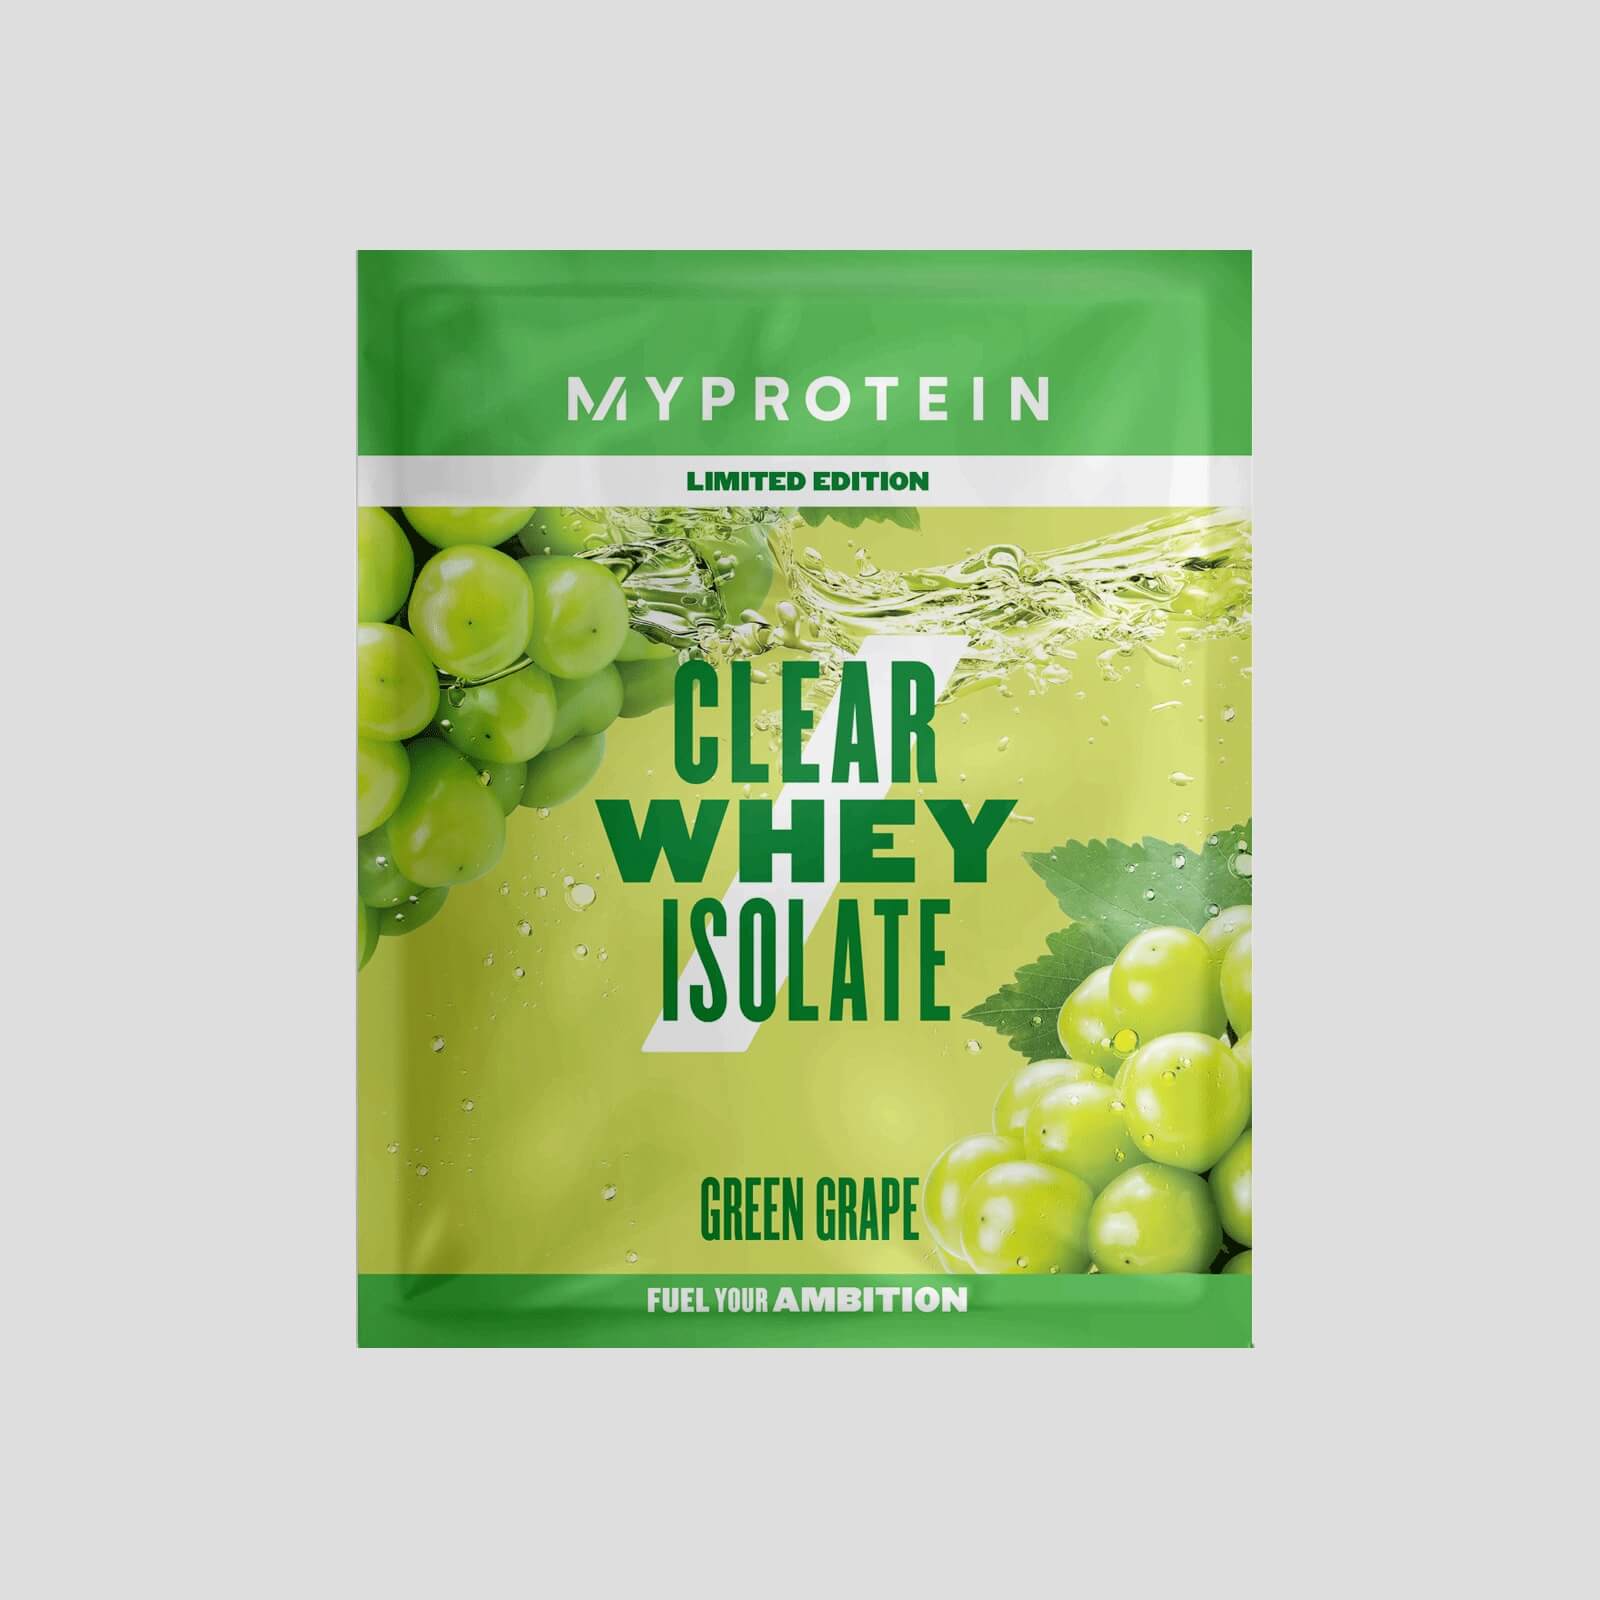 Clear Whey Isolate - Green Grape flavour